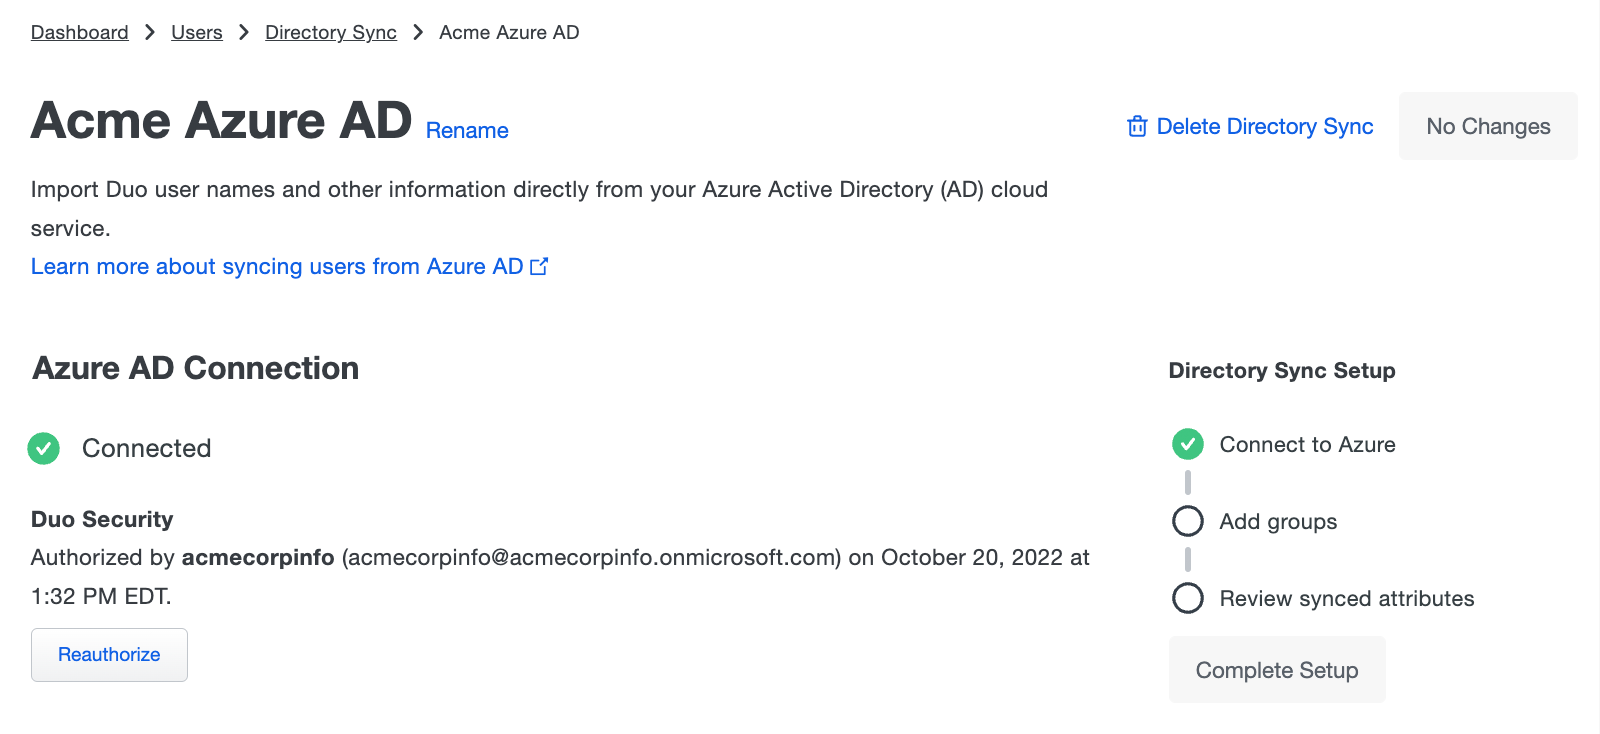 Azure AD Sync Connection with Connected Status